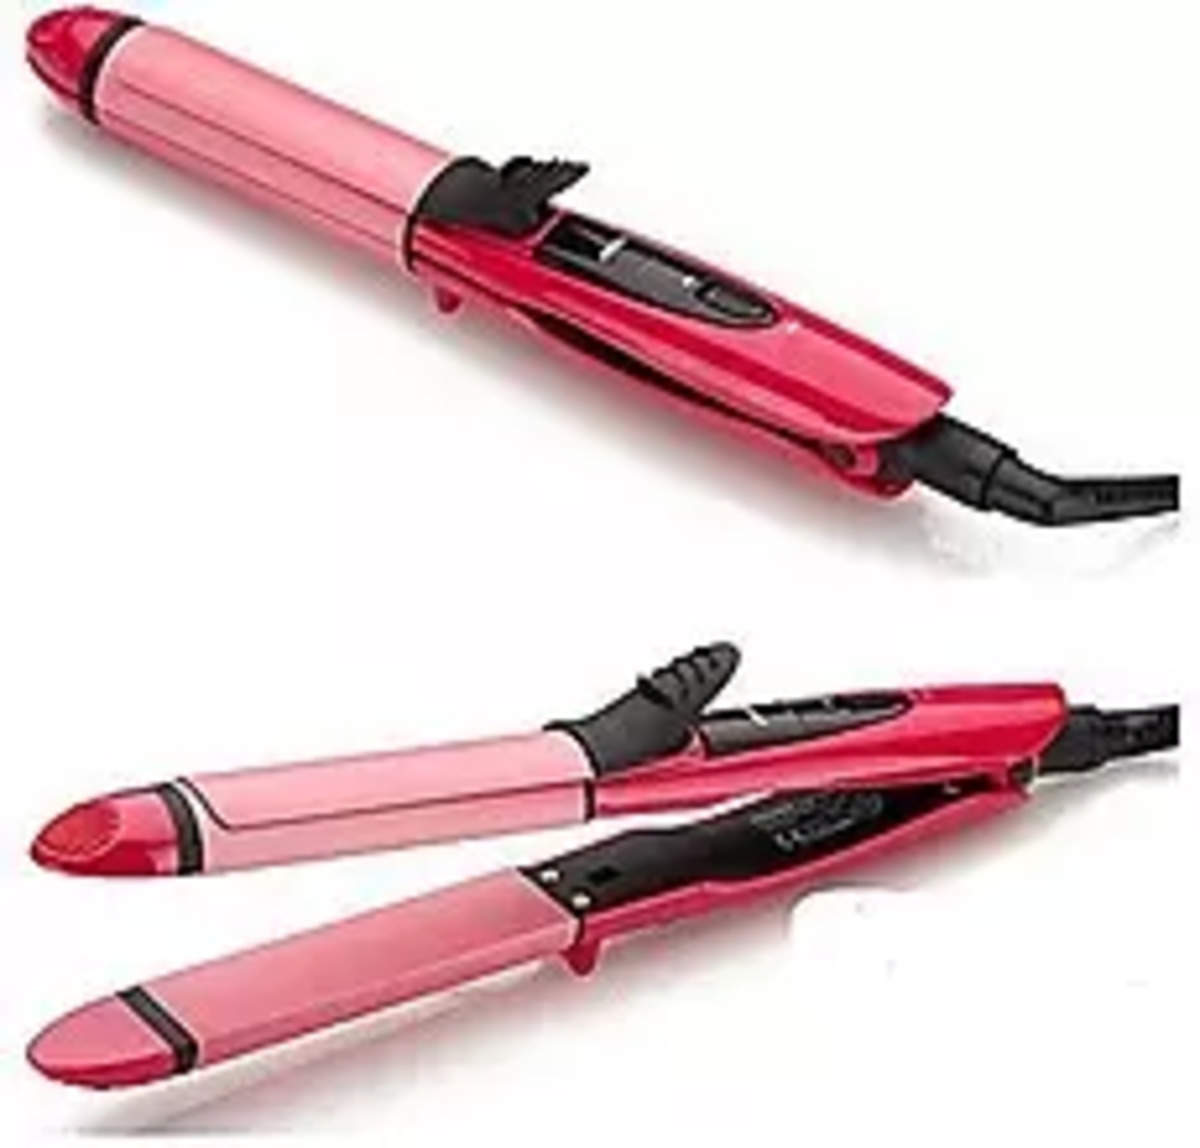 Innova 2 In 1 Hair Straightener with Curler and Ceramic Plate (PNHC2009) Price  in India, Specifications and Review